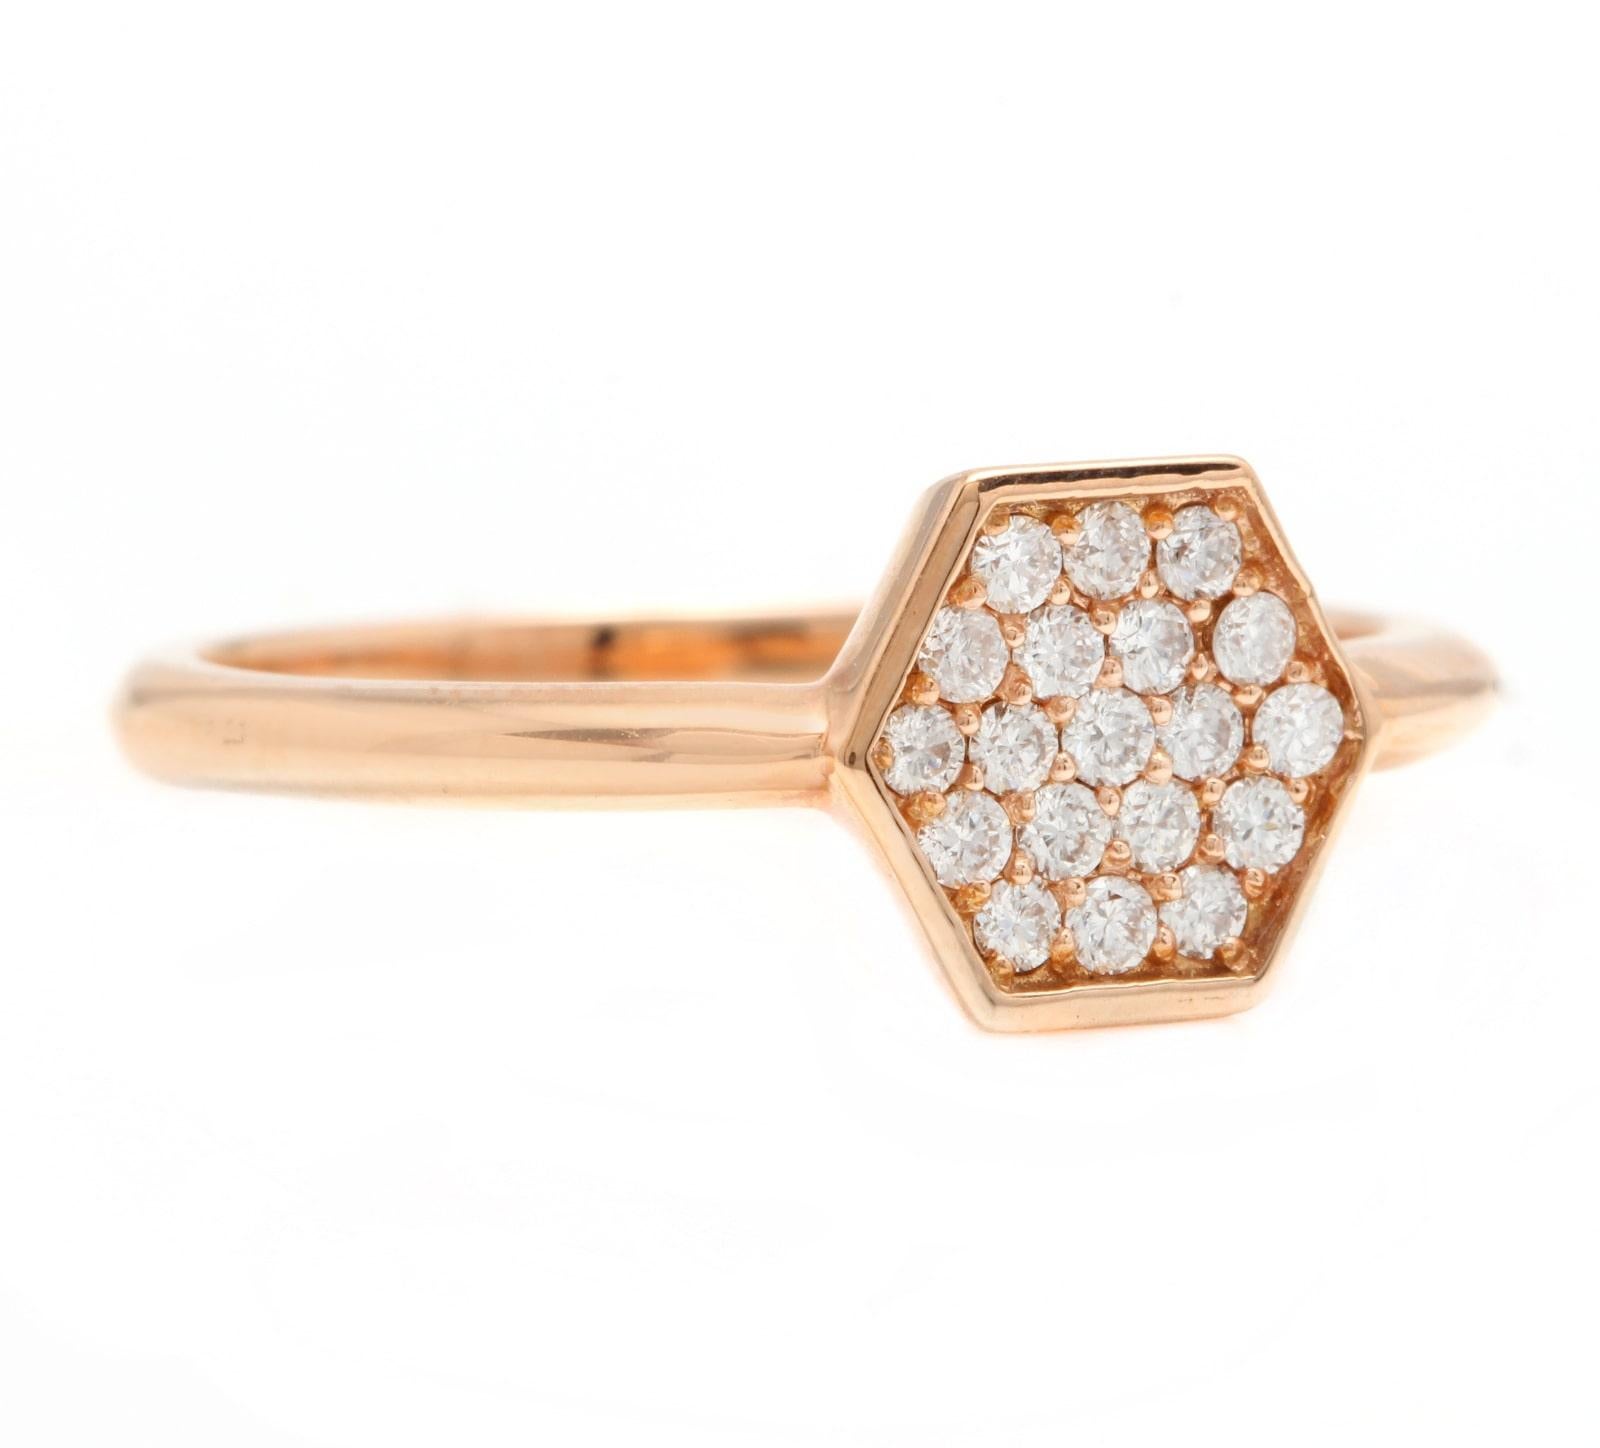 Splendid 0.30 Carats Natural Diamond 14K Solid Rose Gold Ring

Suggested Replacement Value: Approx. $1,500.00

Stamped: 14K

Total Natural Round Cut Diamonds Weight: Approx. 0.30 Carats (color G-H / Clarity SI1-SI2)

The width of the ring is: